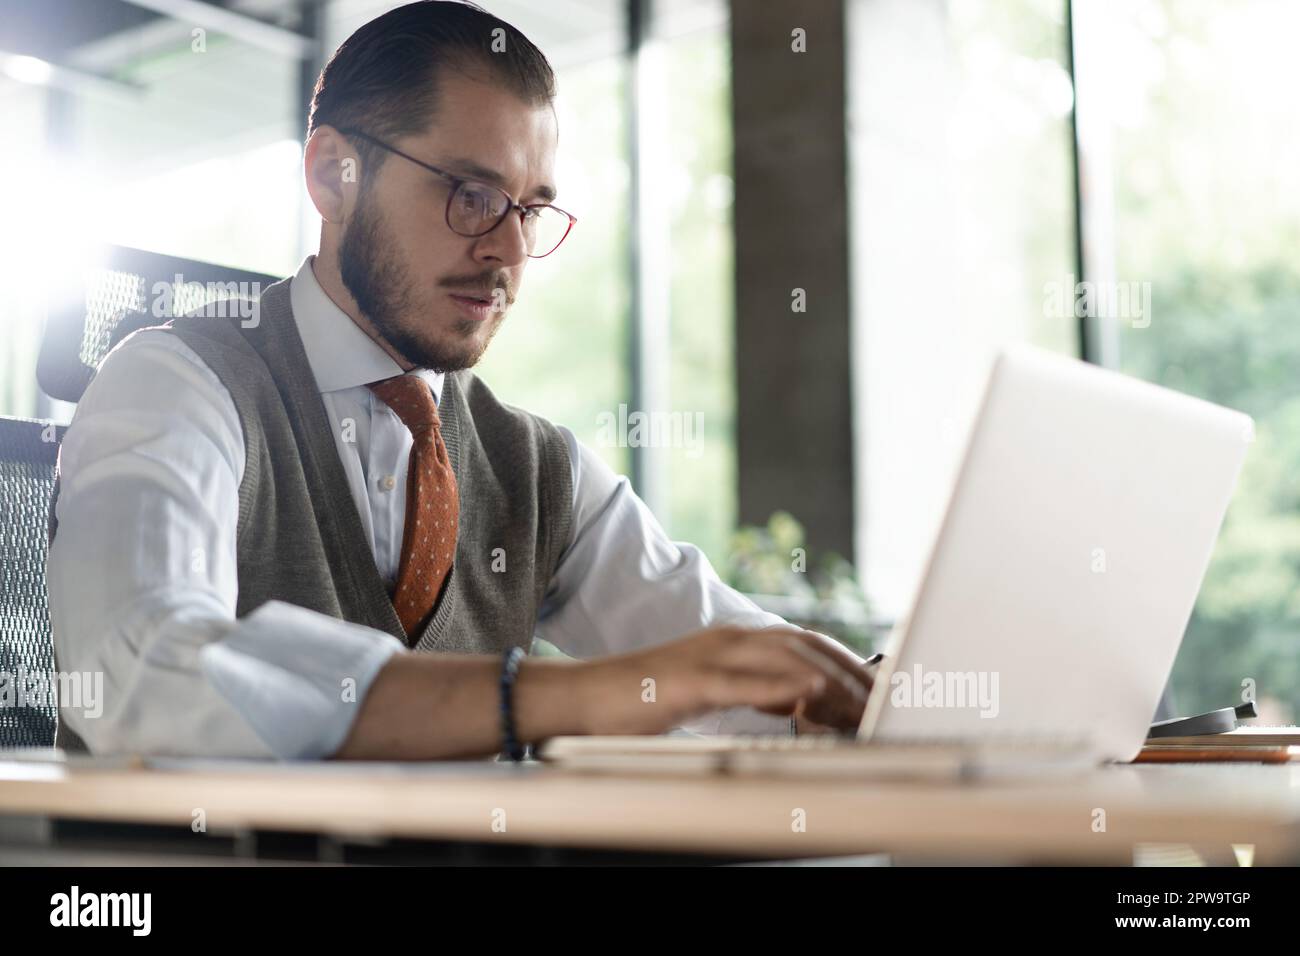 Modern Office Businessman Working on Computer. Portrait of Successful Middle-aged IT Software Engineer Working on a Laptop at his Desk Stock Photo